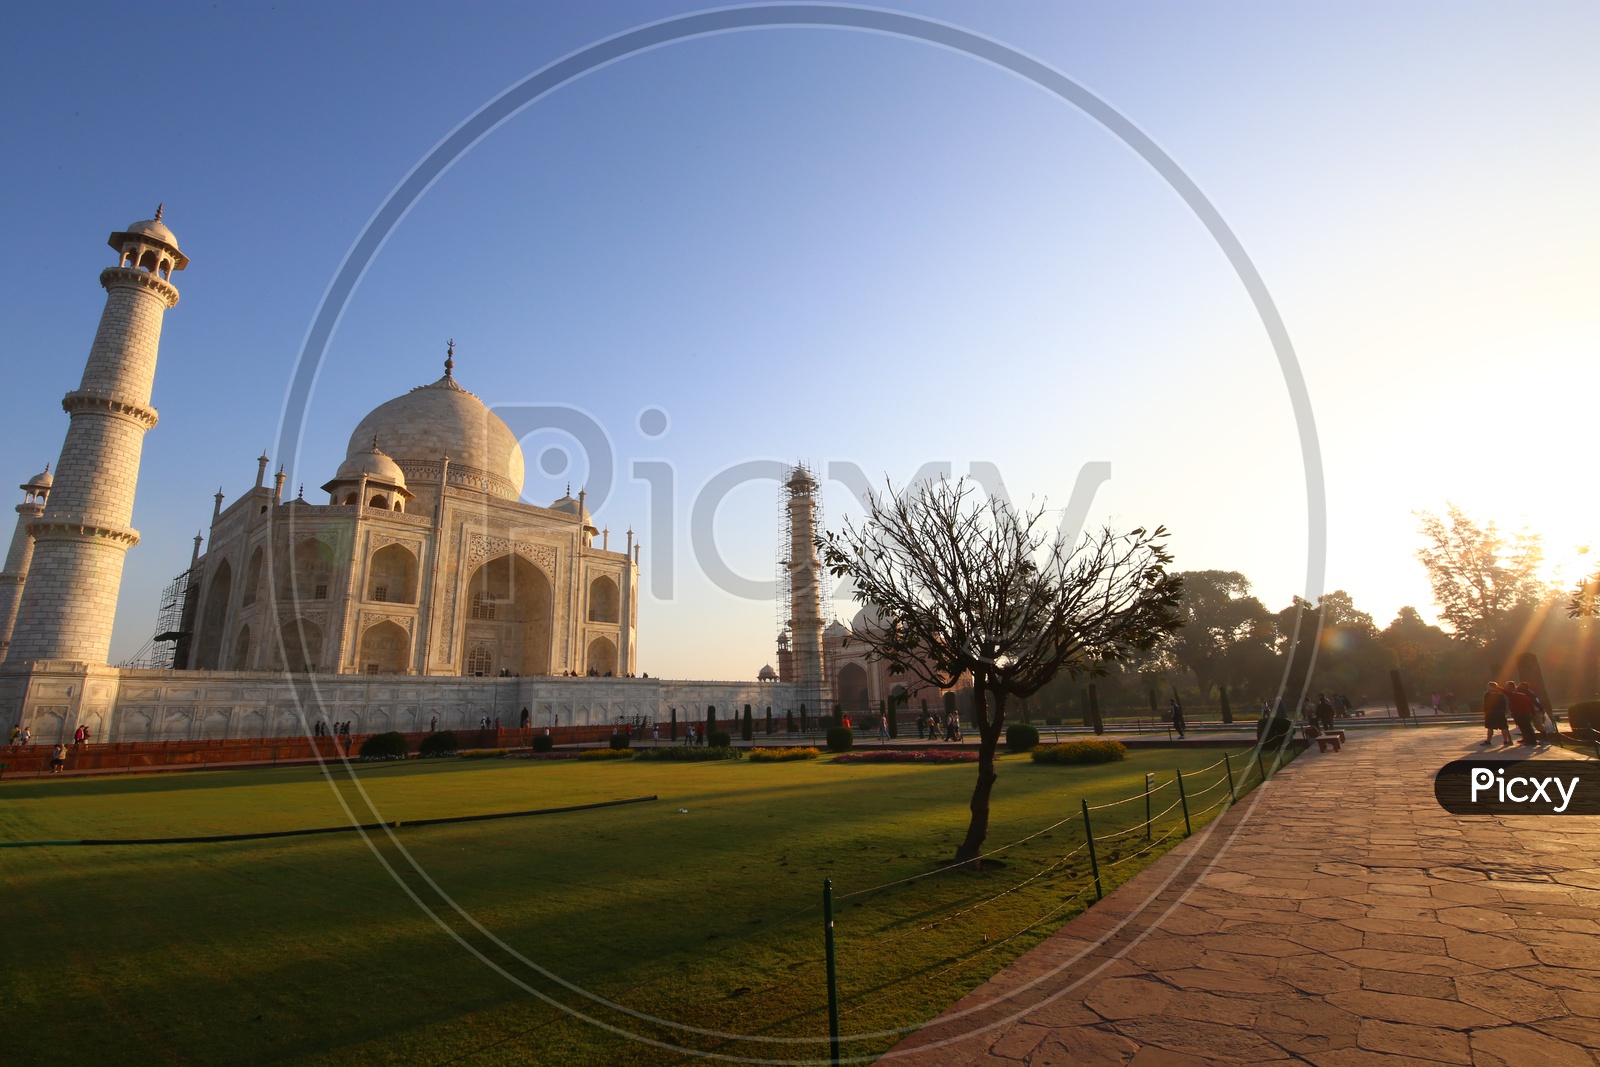 Landscape of Taj Mahal with tree in the foreground